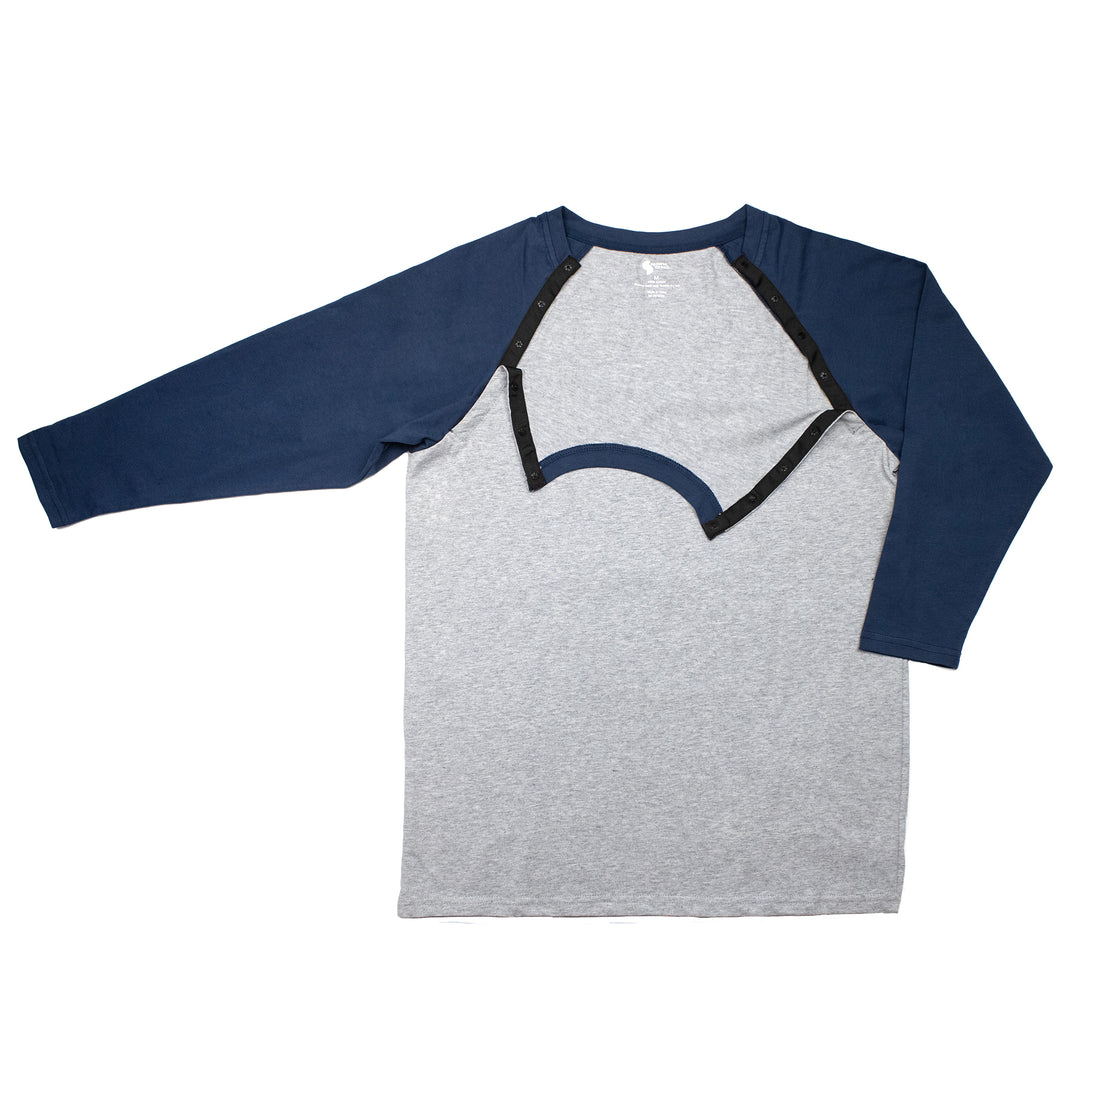 Adult Raglan Access Tee for swift access to broviacs, central lines, and chemo ports